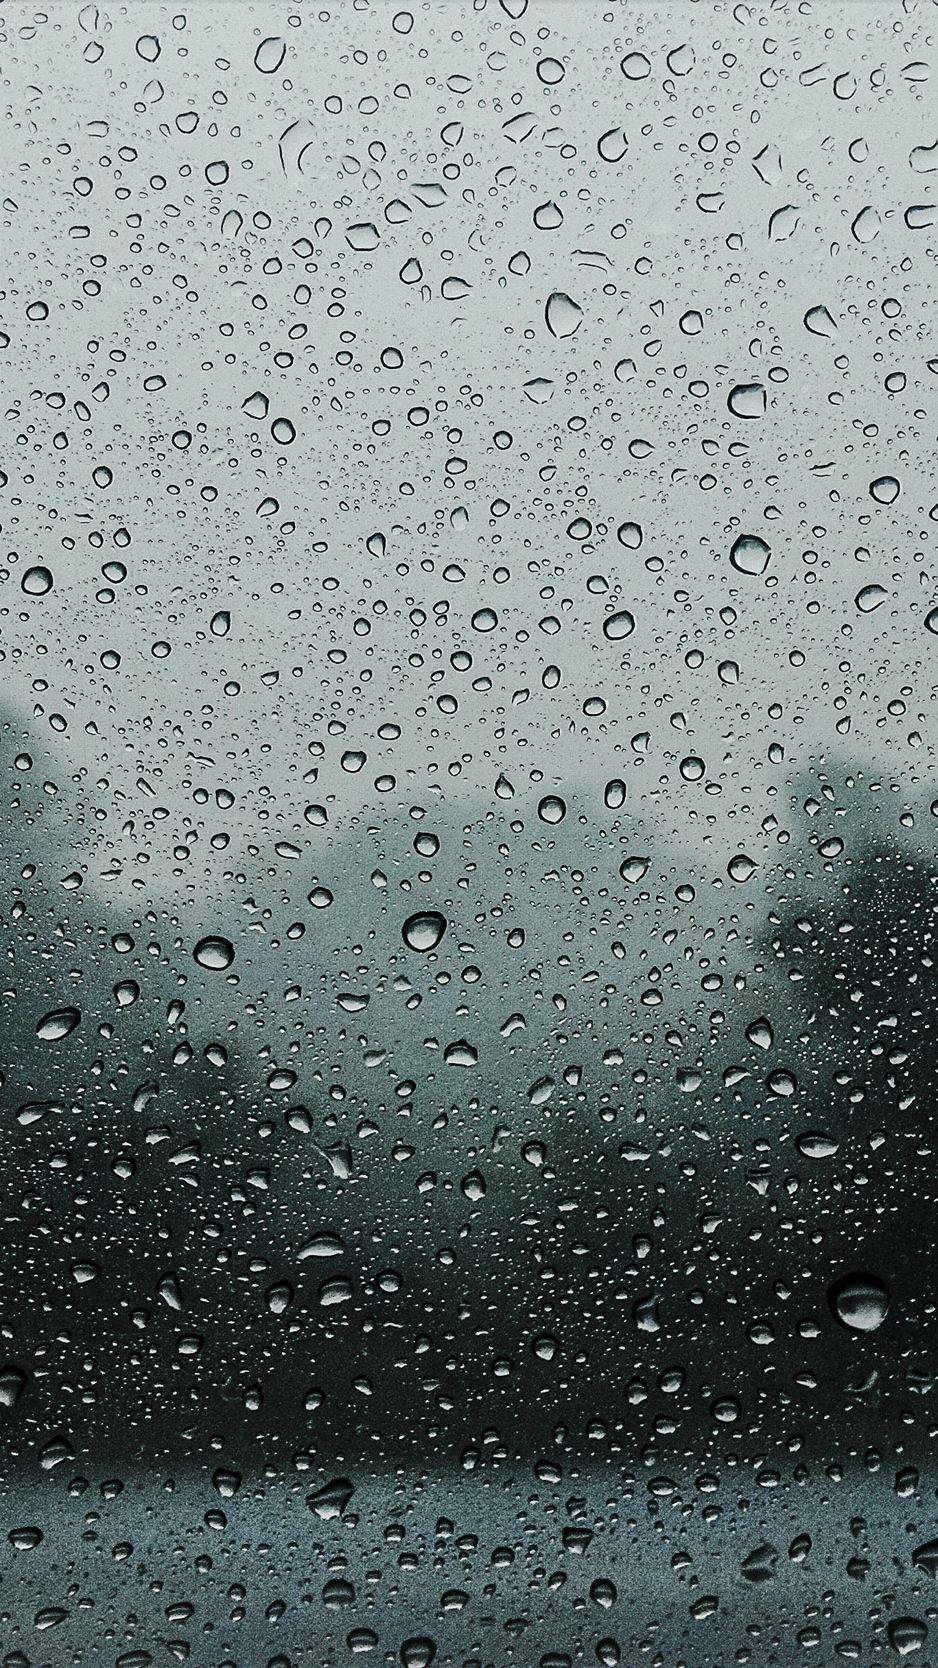 "A view of the wet city through an Iphone" Wallpaper